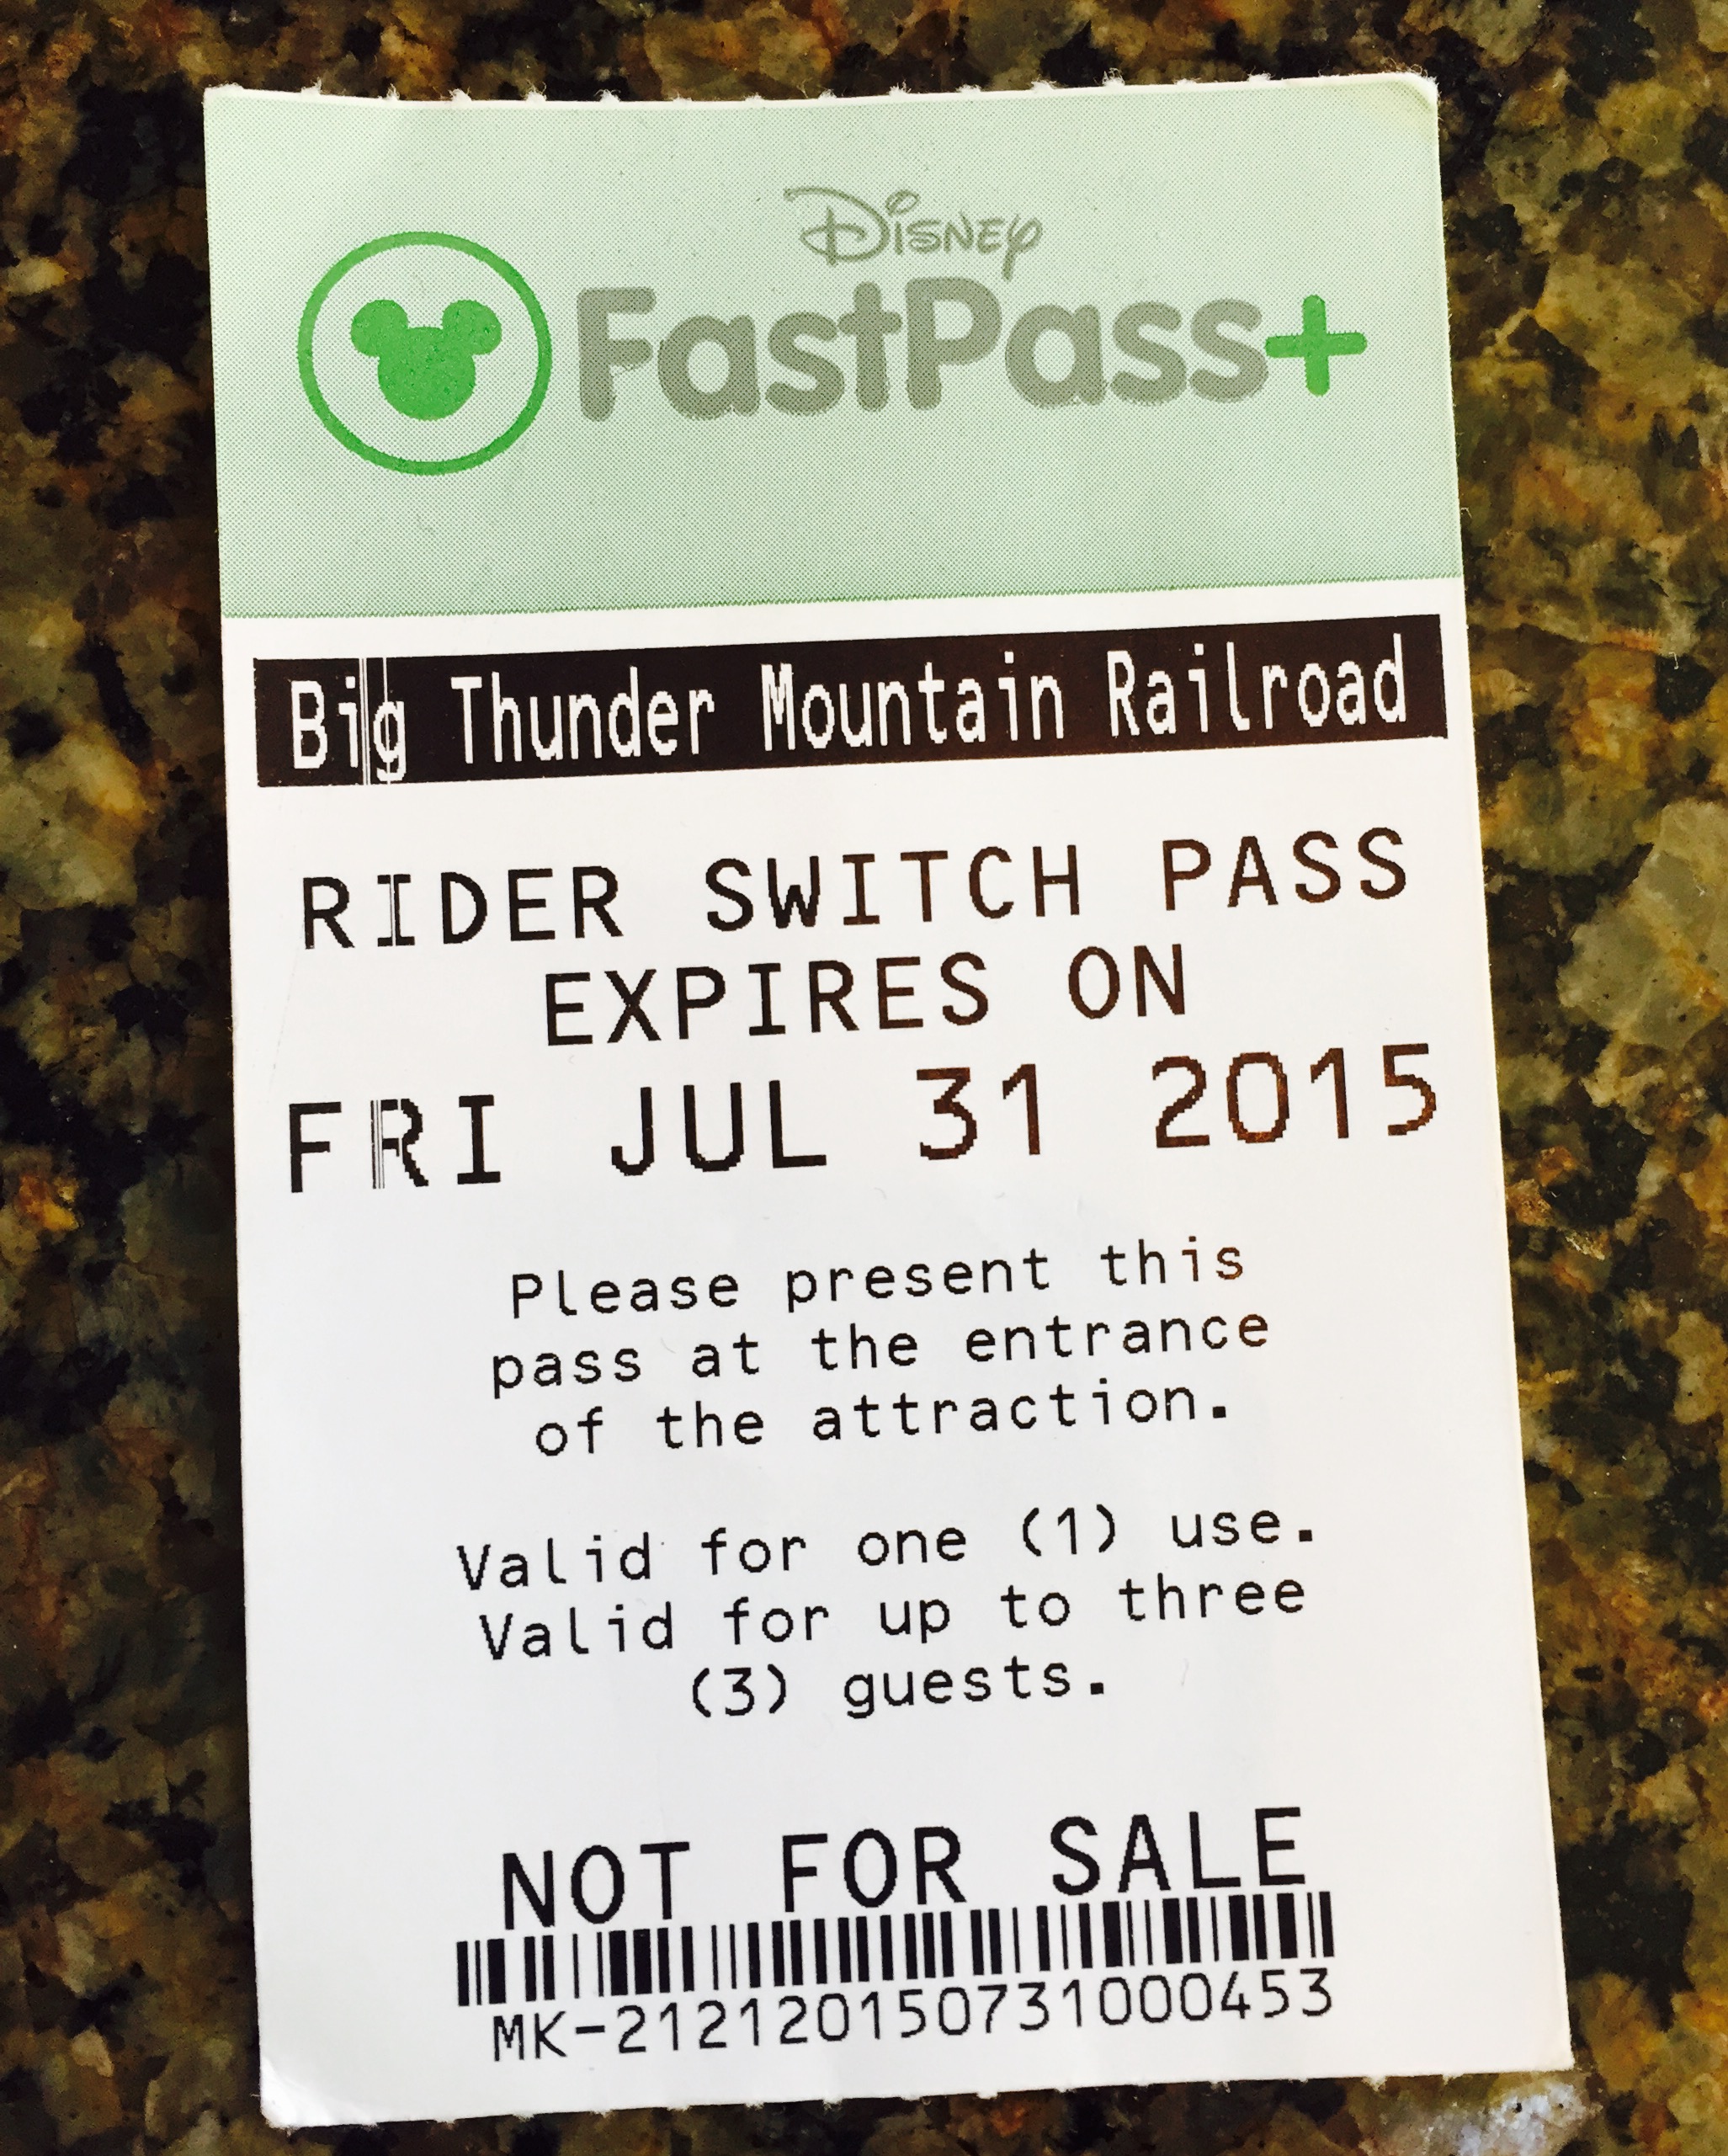 Rider Switch: How It Works at Disney World